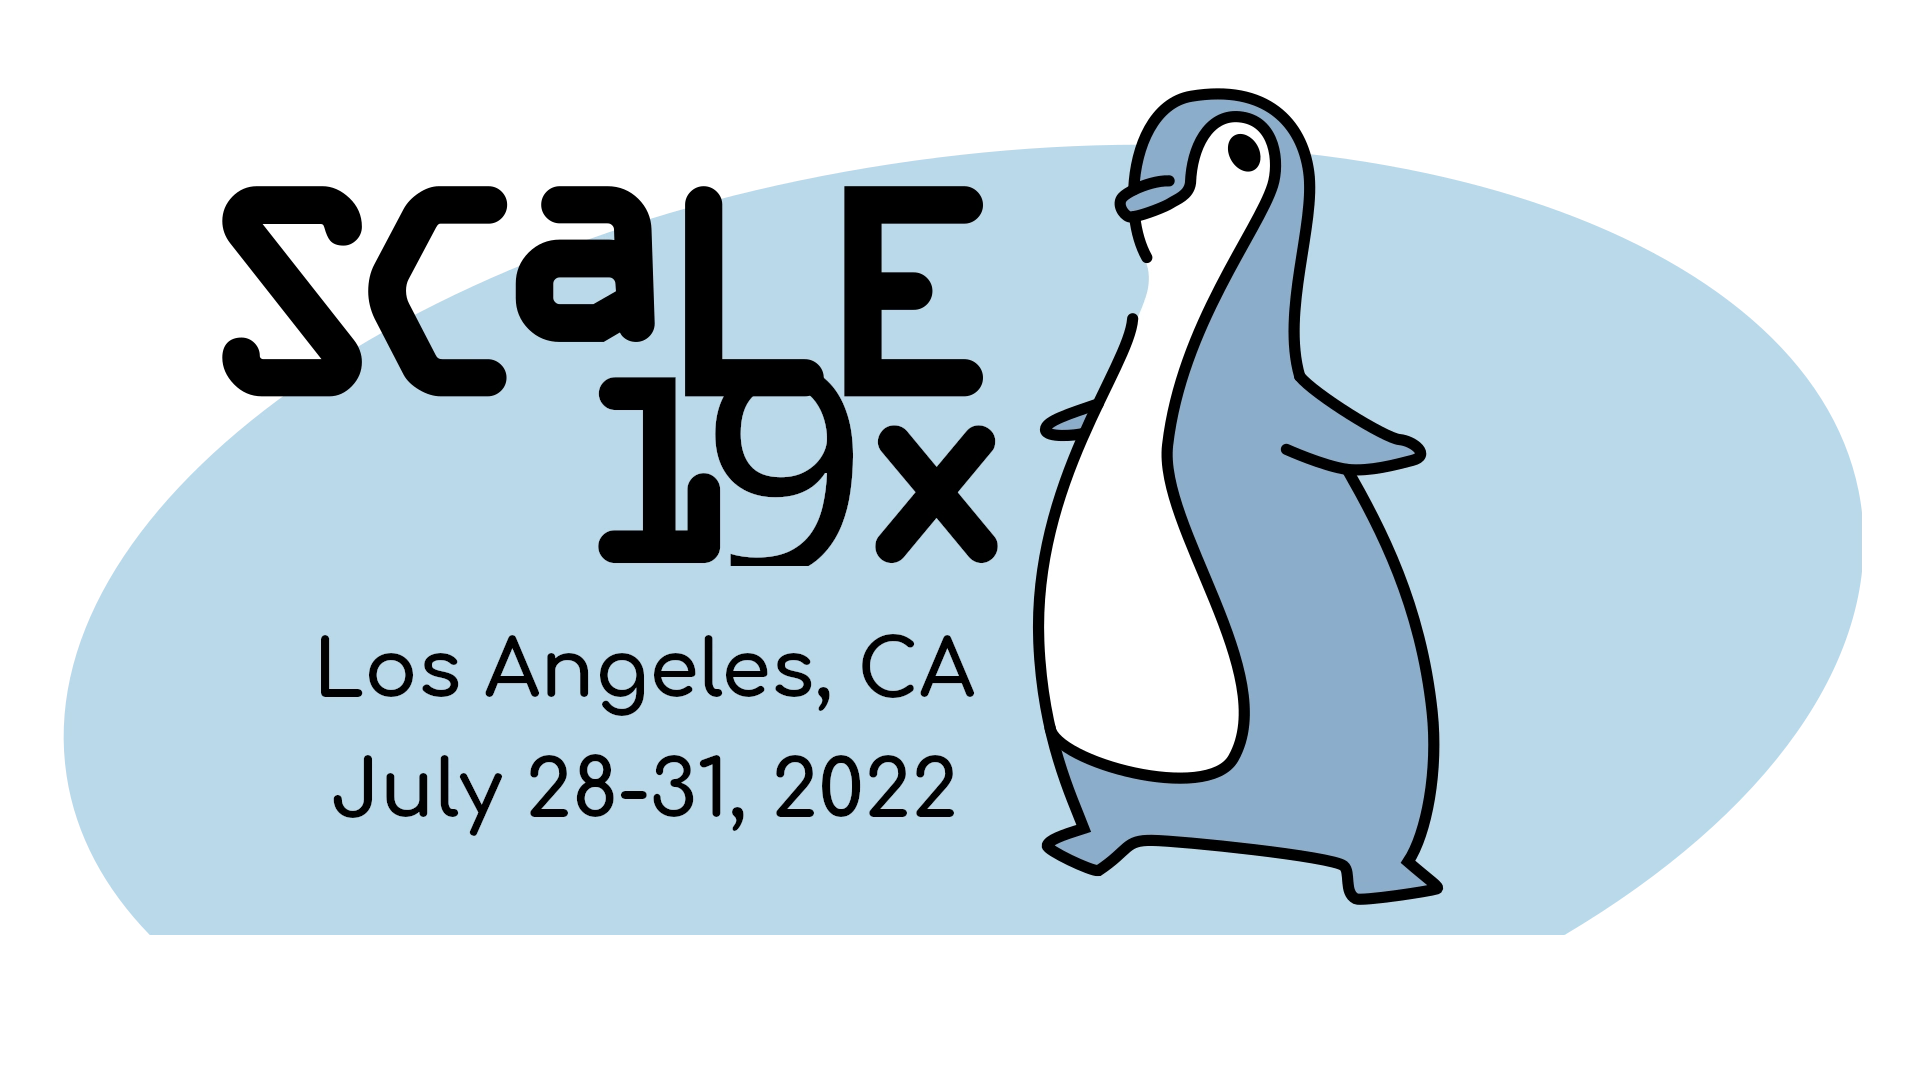 SCaLE 19x, the 19th Annual Southern California Linux Expo, Will Take Place July 28-31, 2022